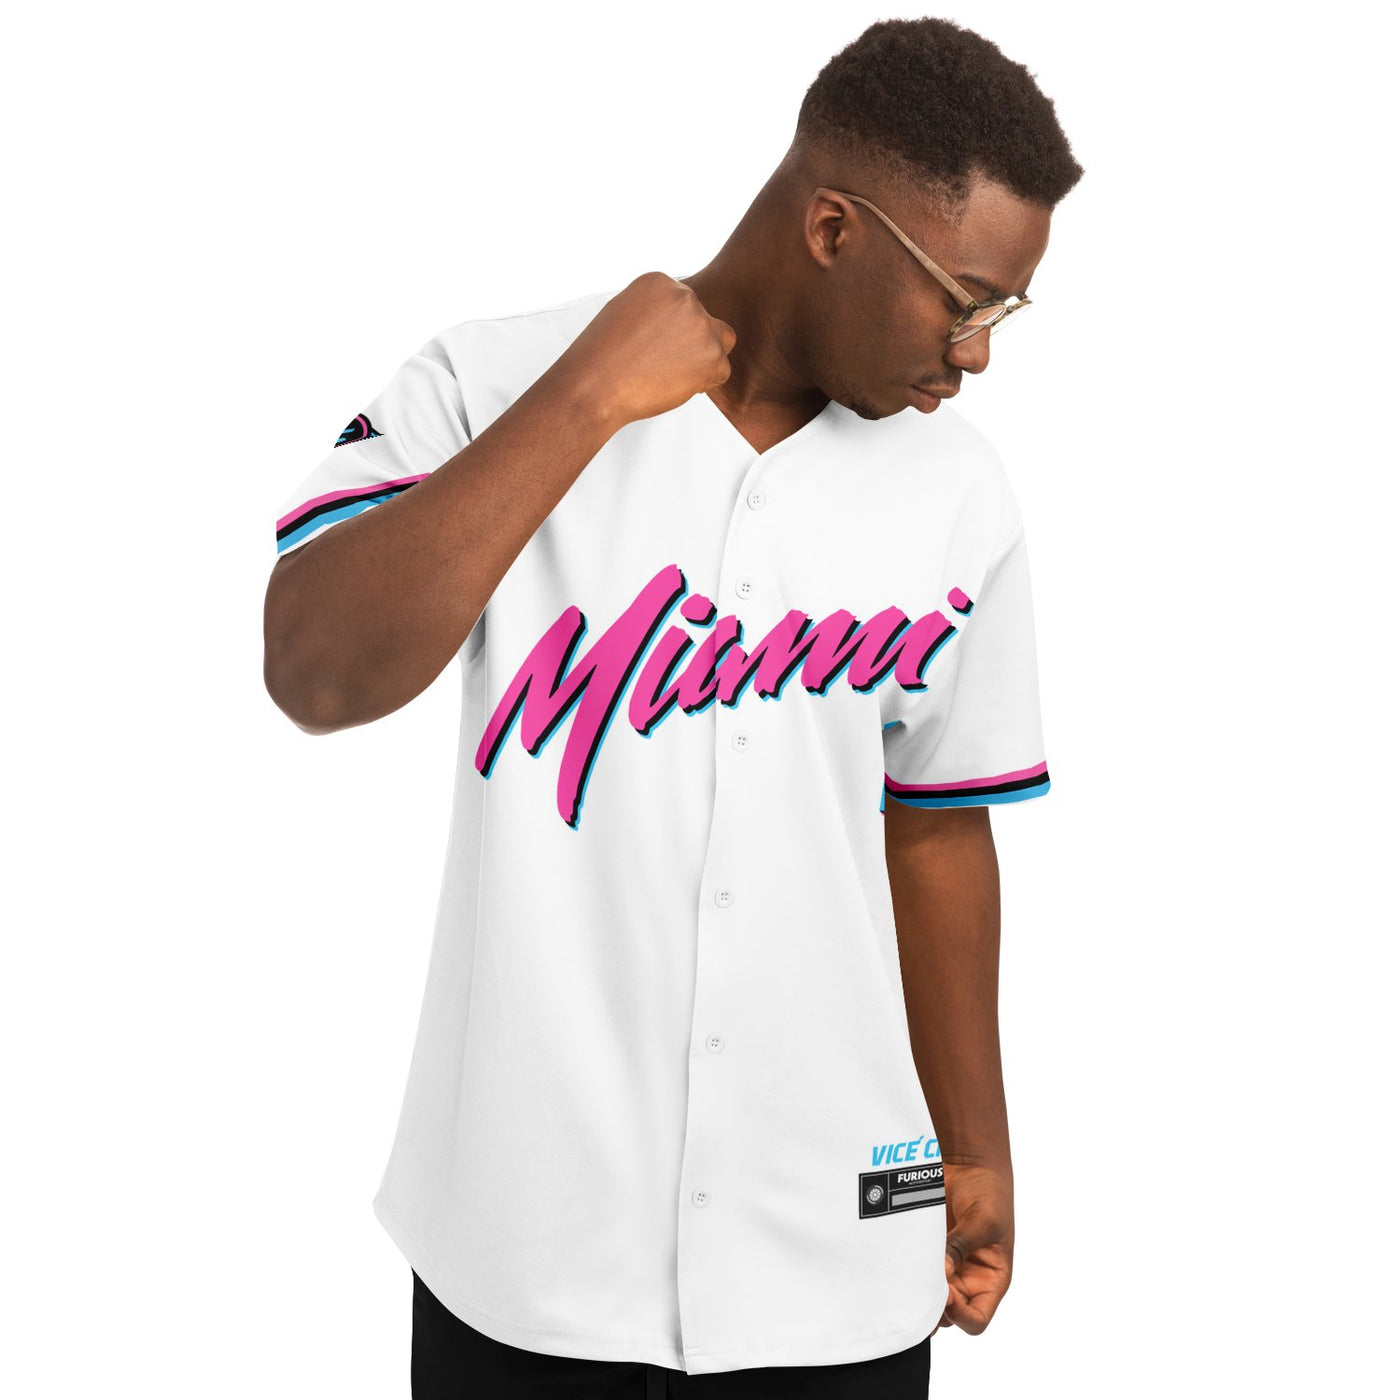 Alonso - Miami Vice Home Jersey - Furious Motorsport